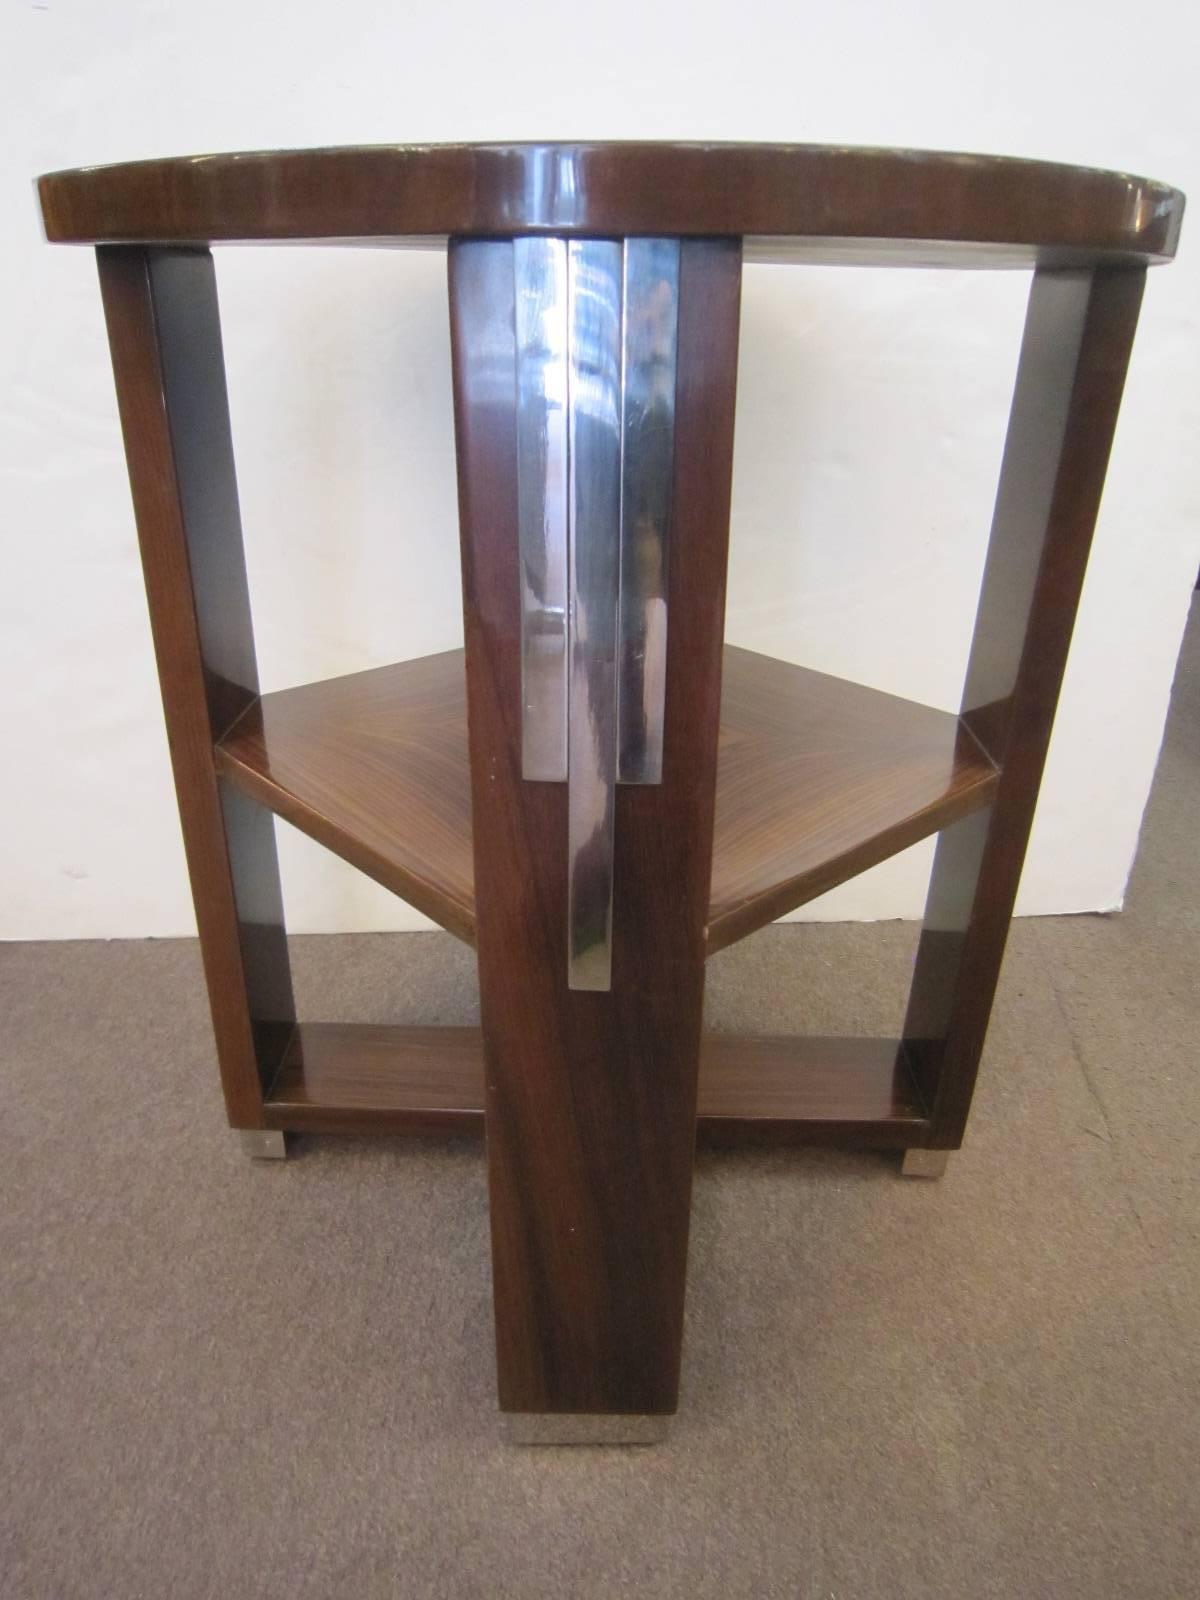 French Art Deco Parquetry Inlaid Rosewood Side Table, Circular with Square Shelf 1